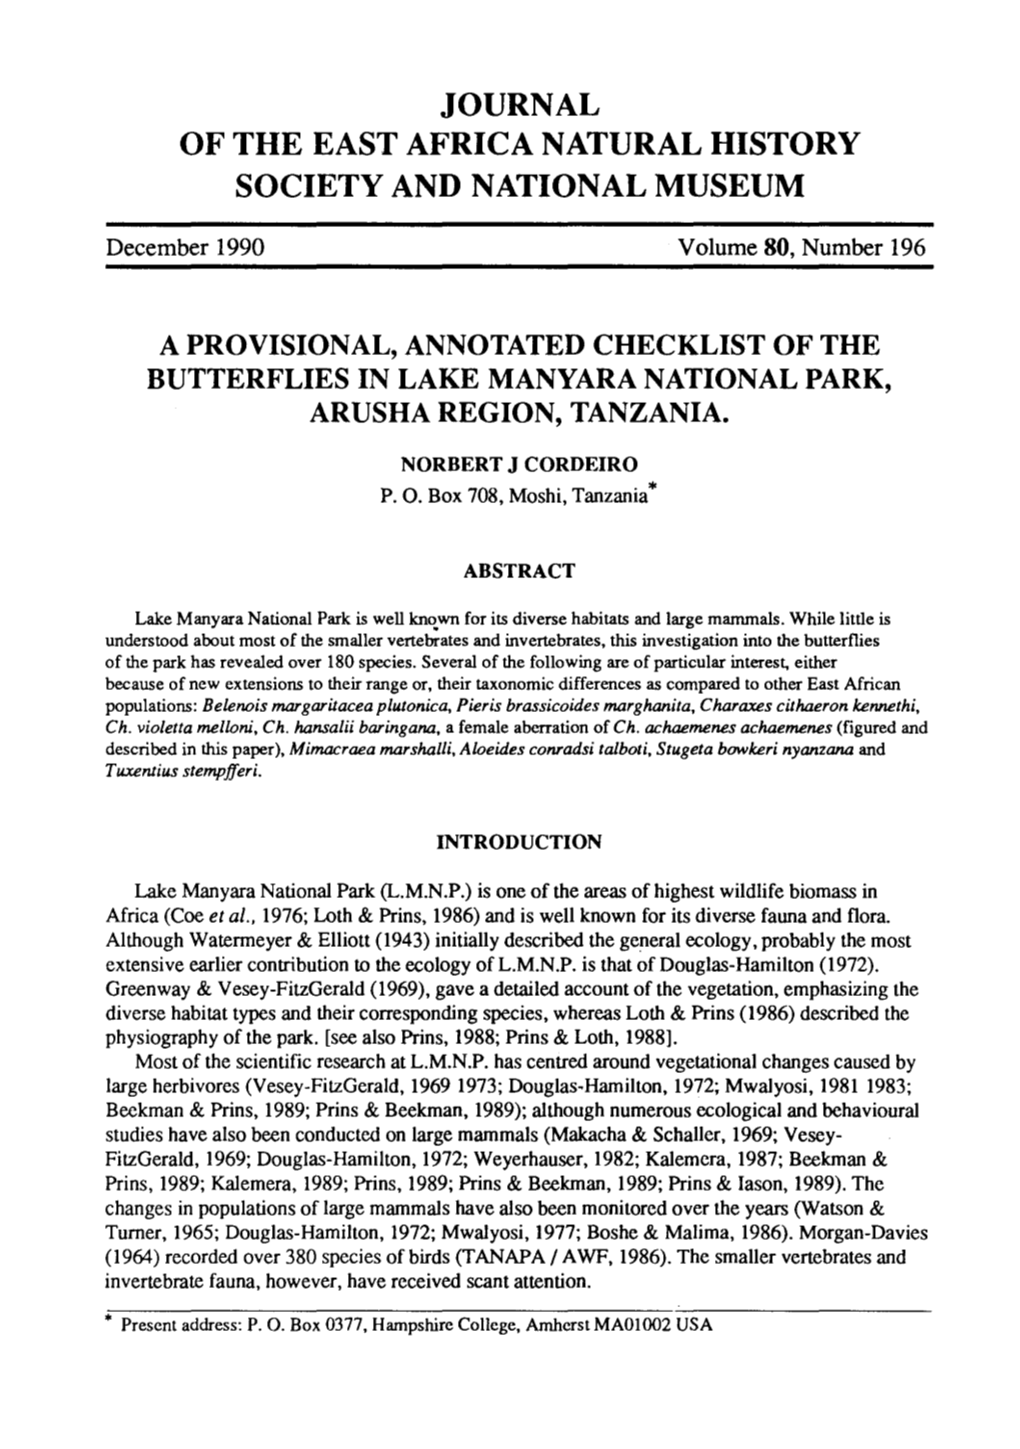 A Provisional, Annotated Checklist of the Butterflies in Lake Manyara National Park, Arusha Region, Tanzania